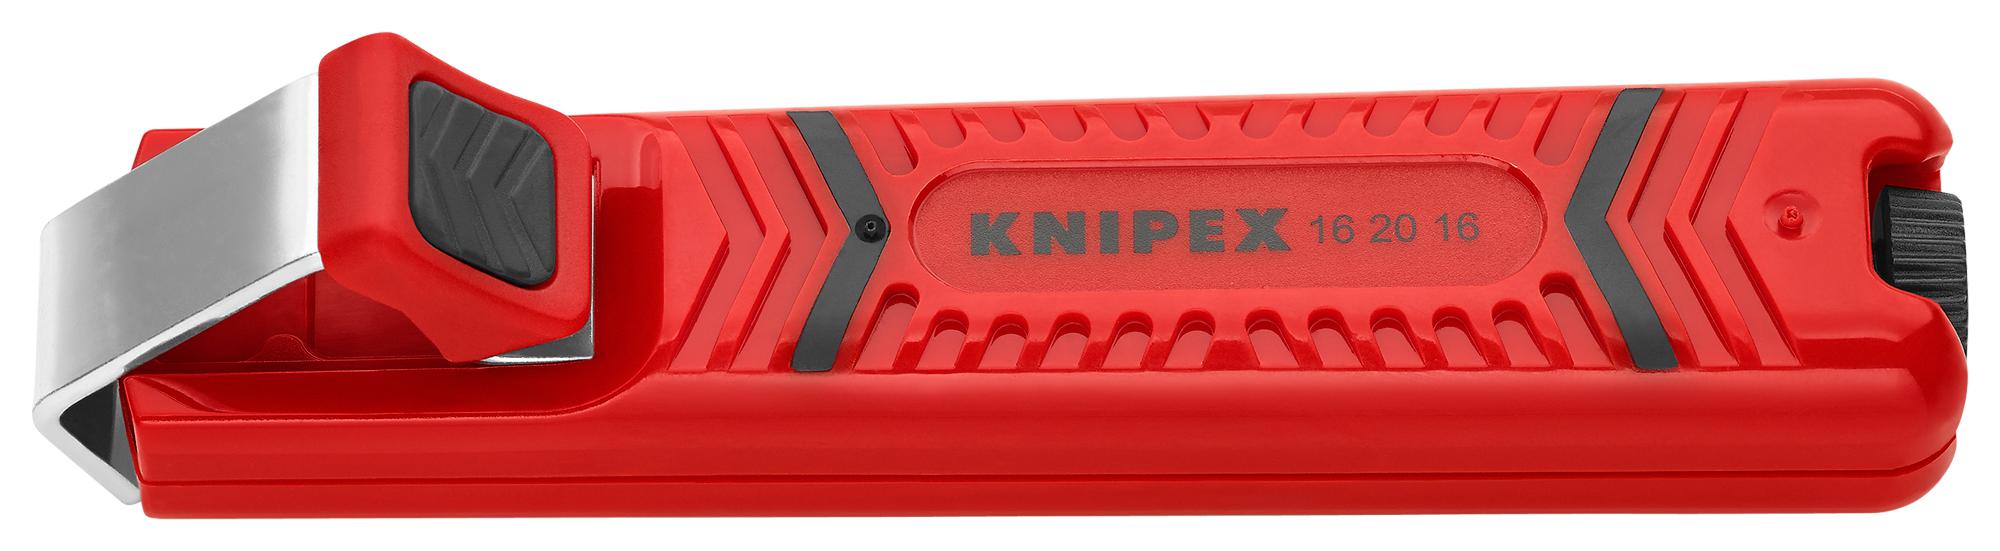 Knipex 16 20 16 Sb Cable Stripping Tool, 4-16mm